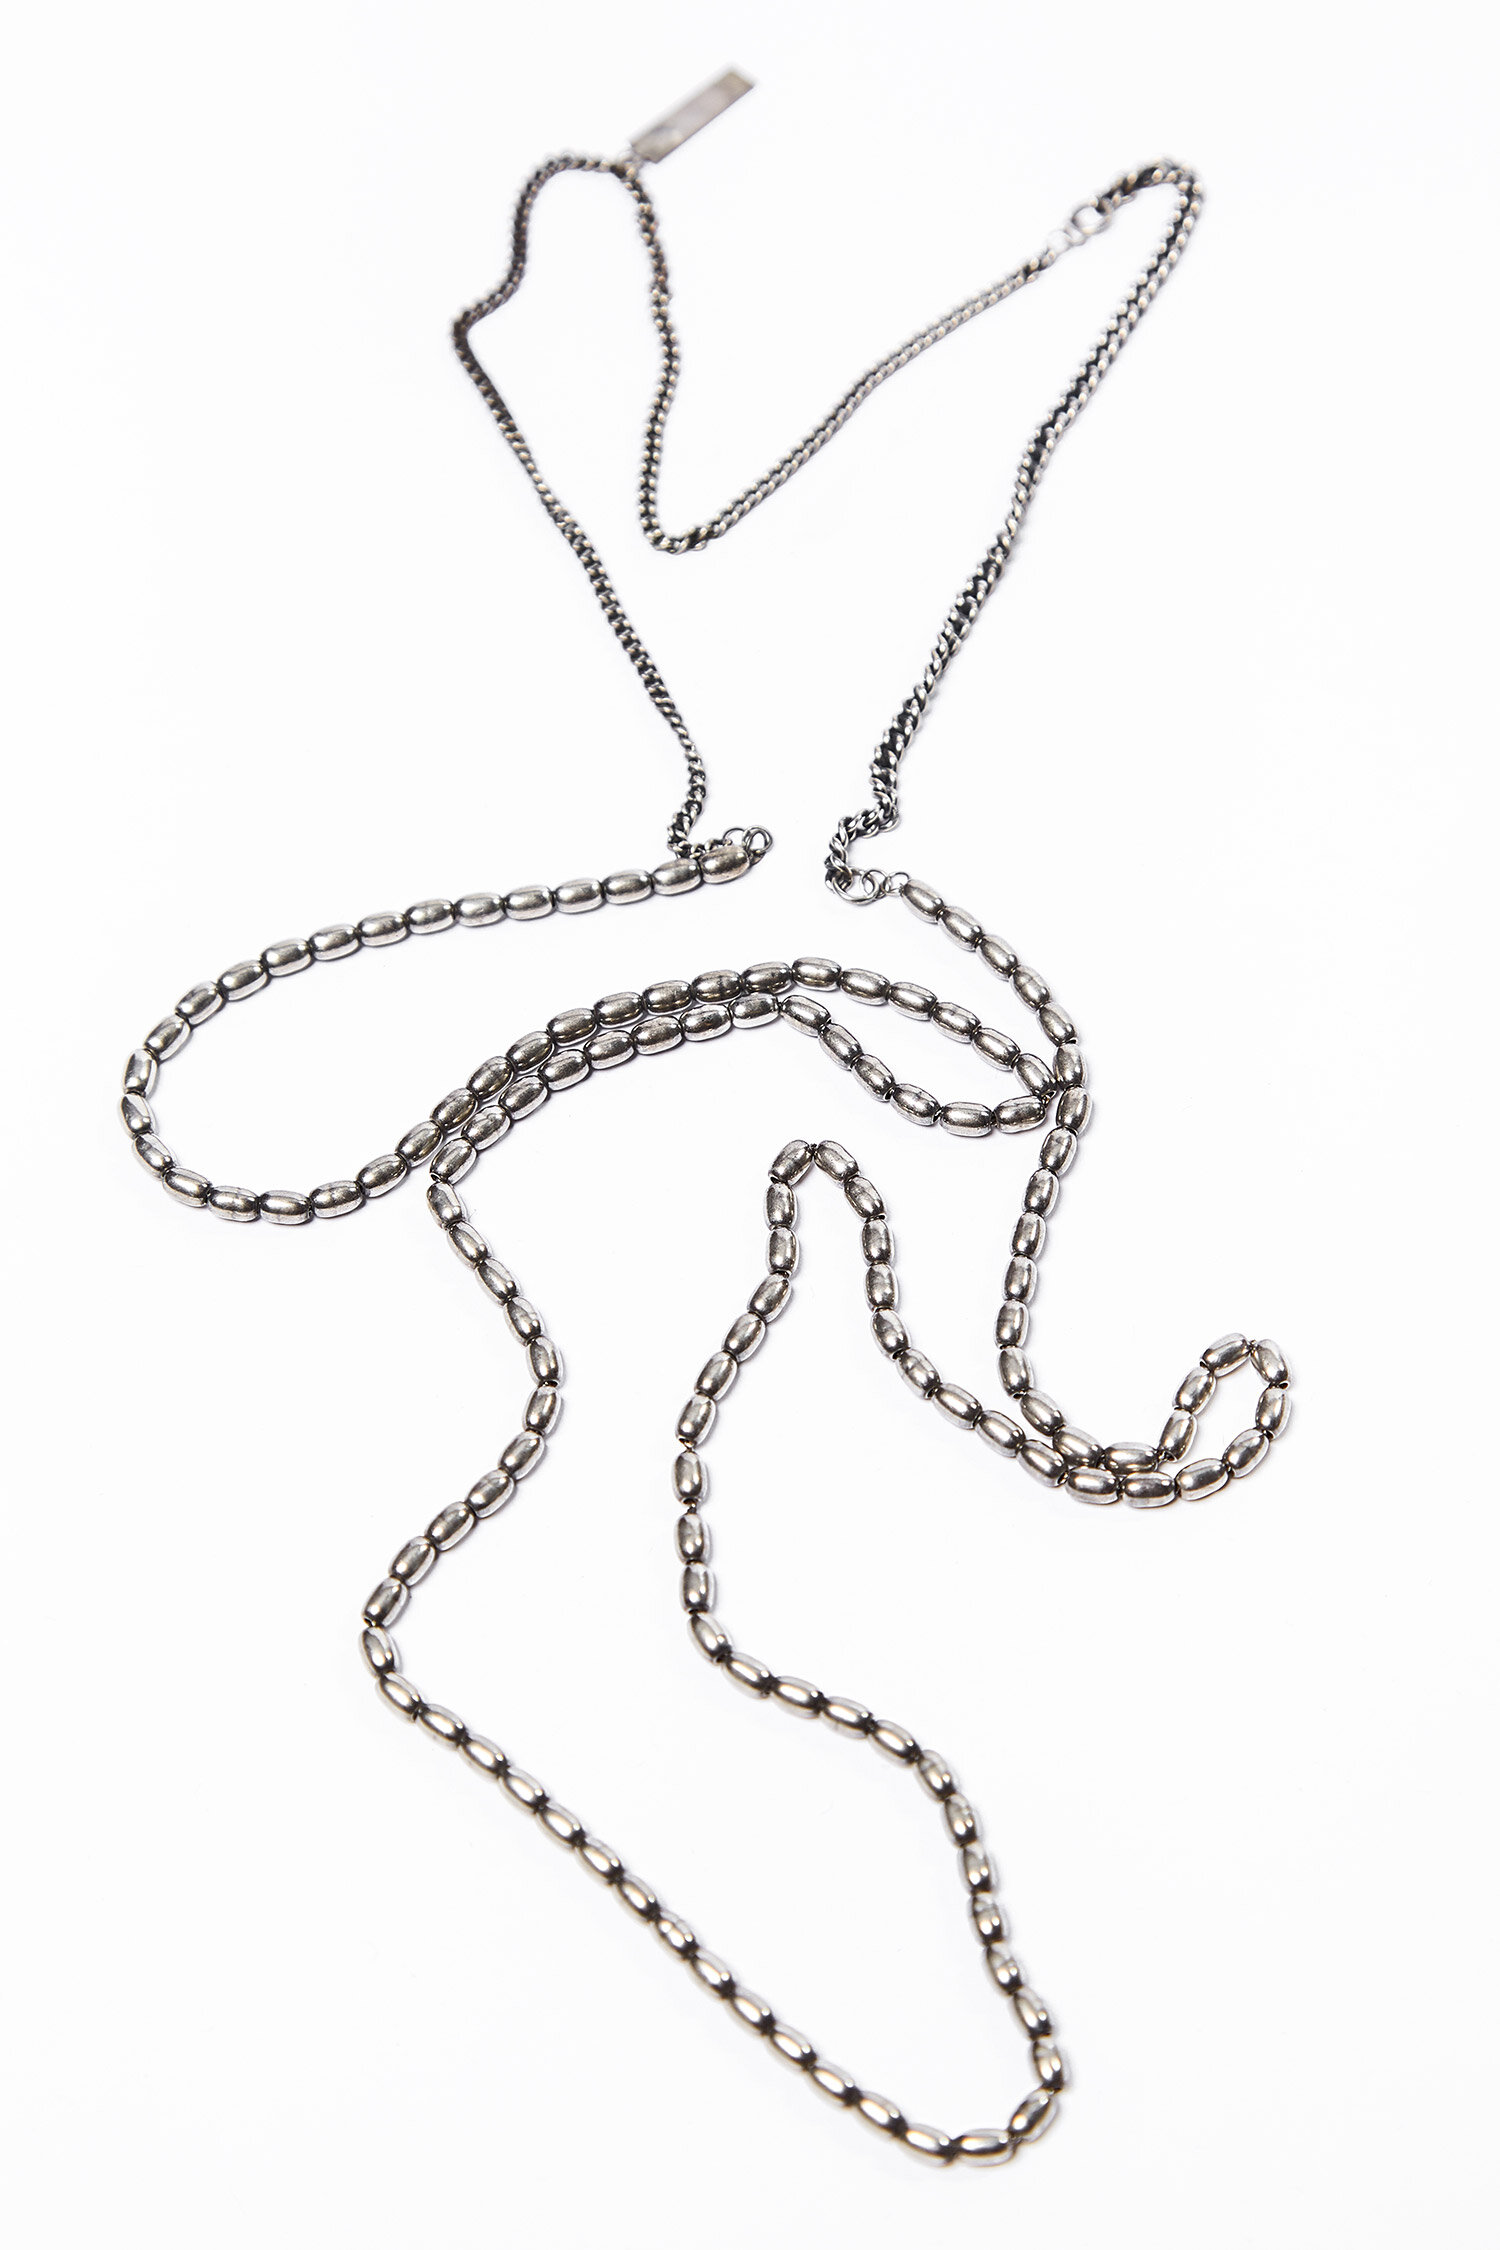 GOTI Long Silver Necklace with 3 Types of Chains — ASIATICA